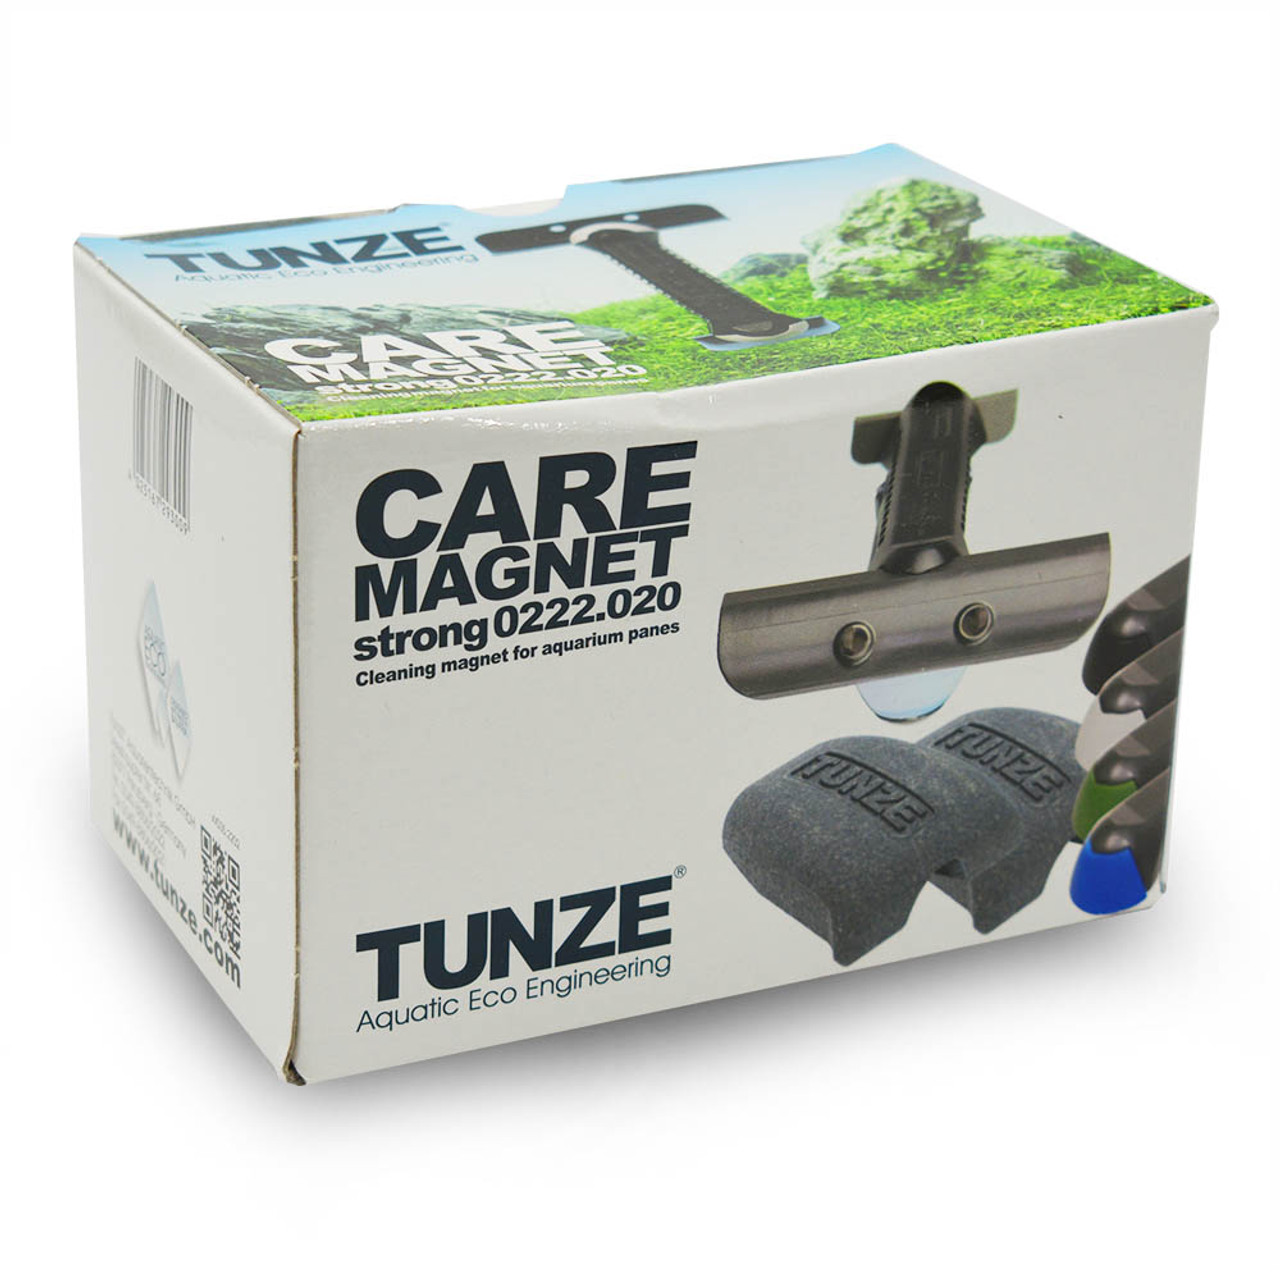 TUNZE Care Magnet strong